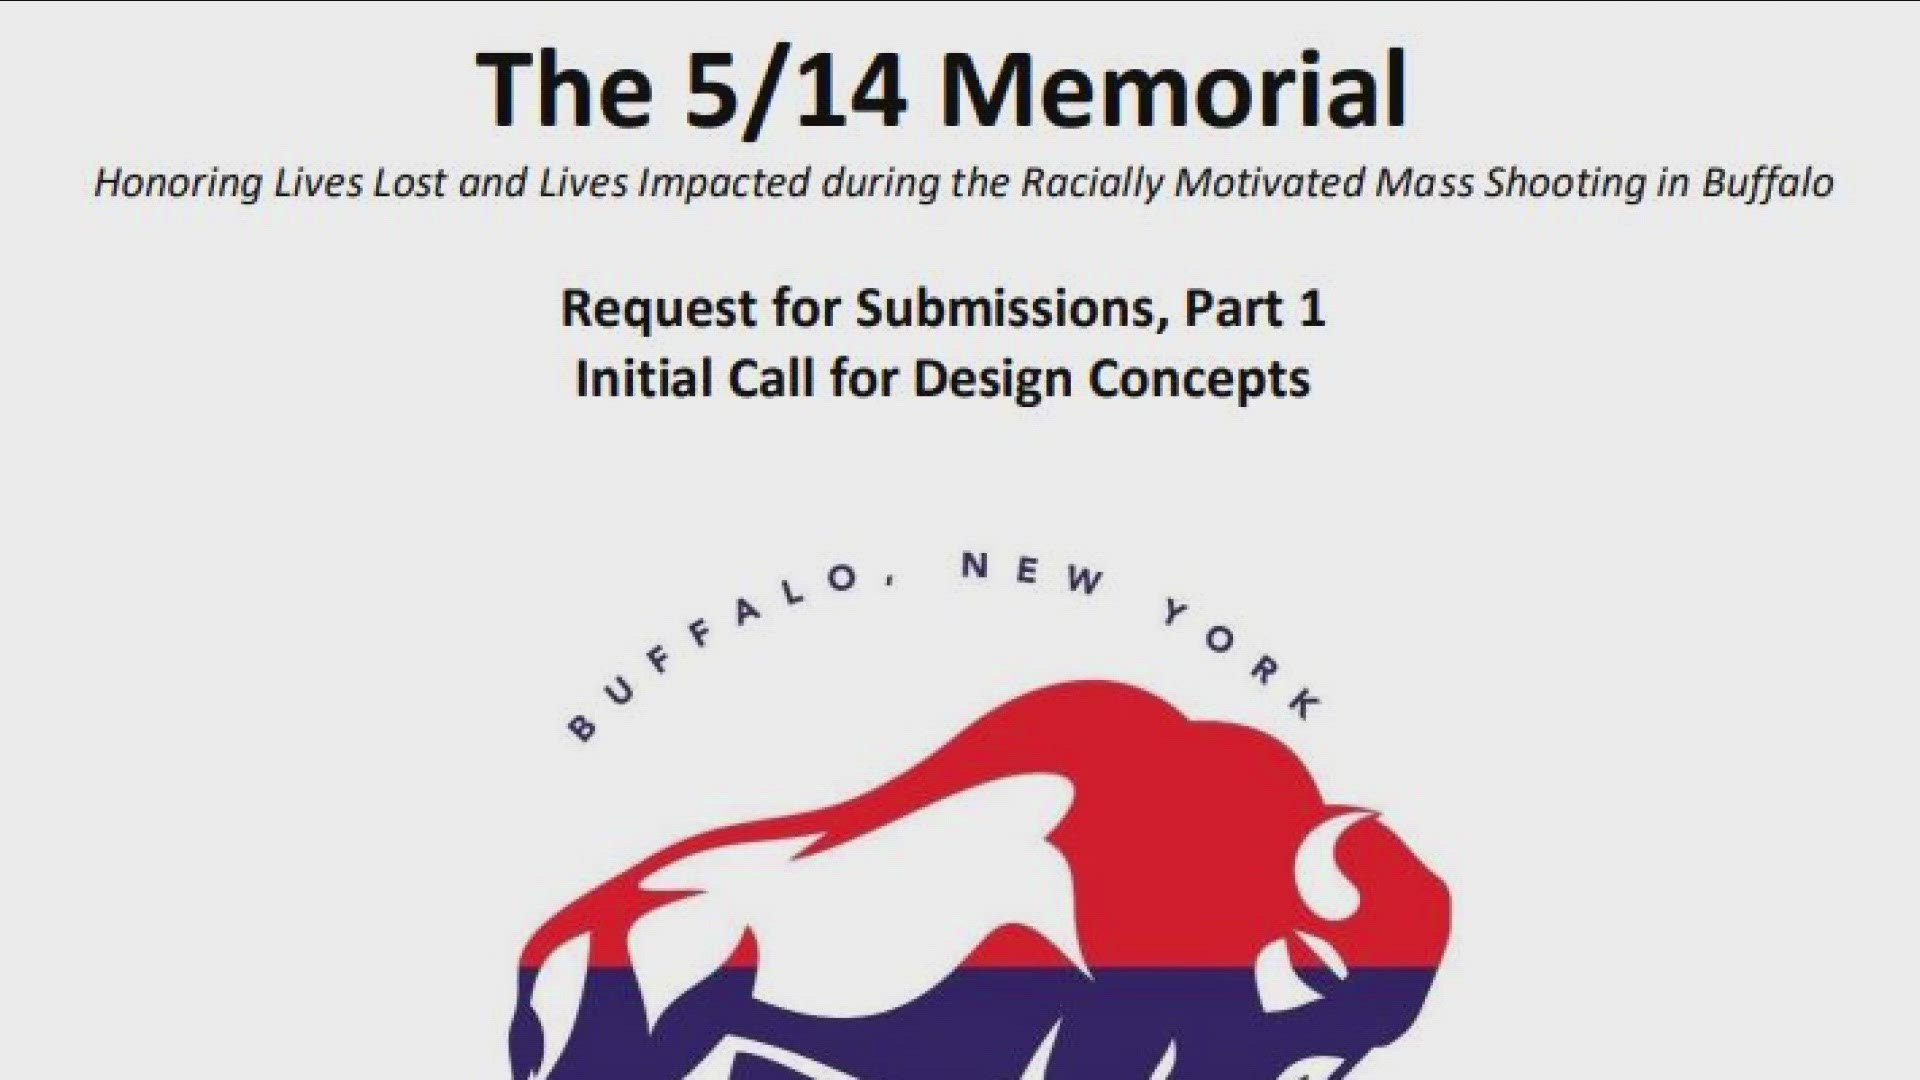 Submissions are now open to the public for a design concept for the 5/14 memorial